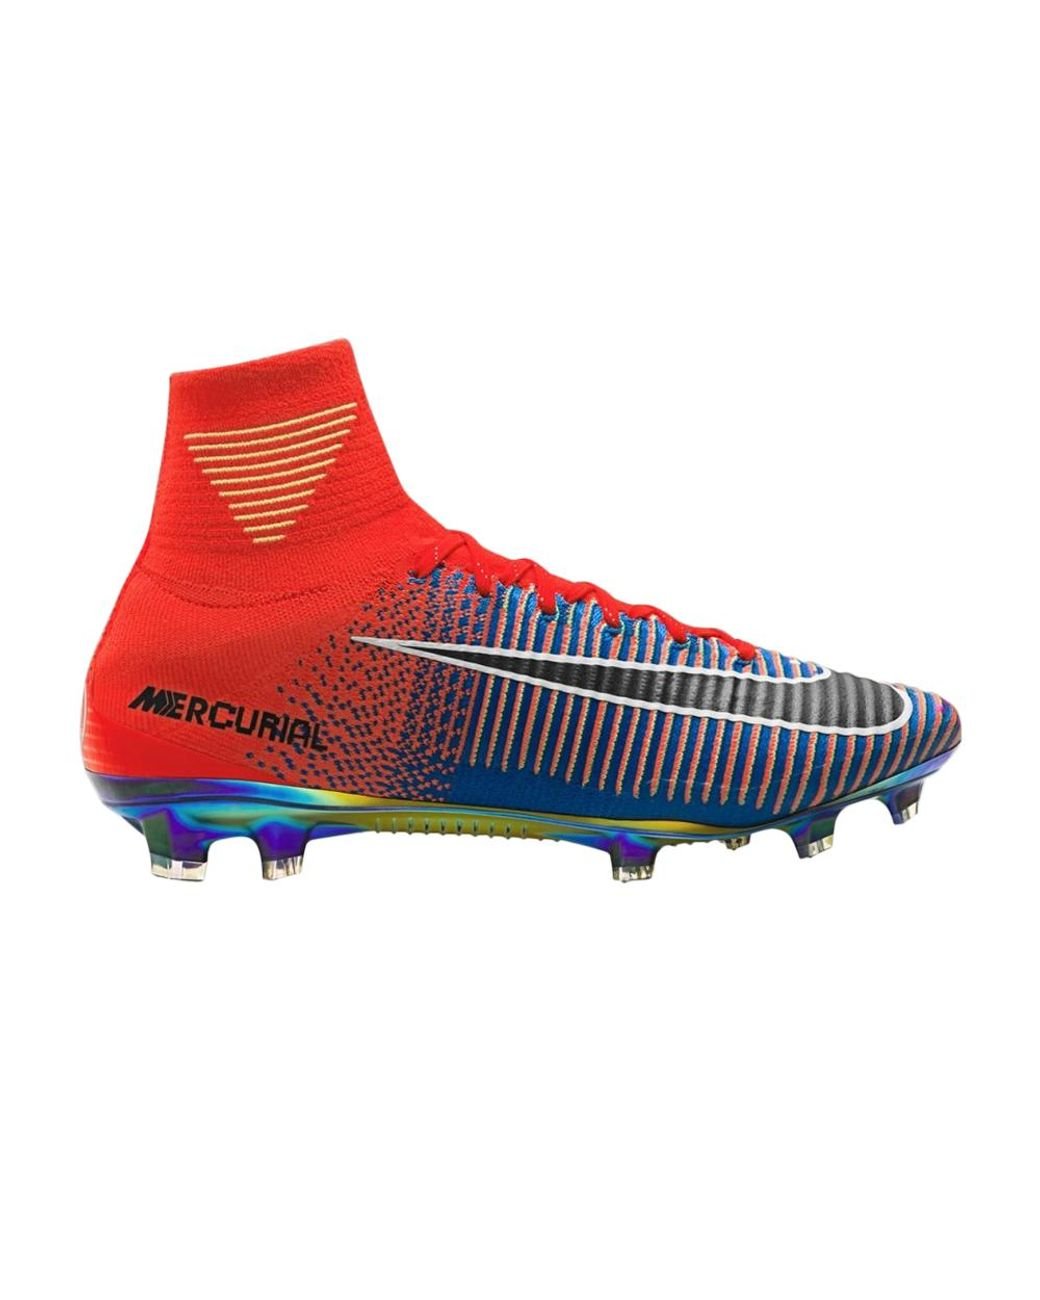 Nike's Mercurial Superfly x EA Sports Football Cleats are a